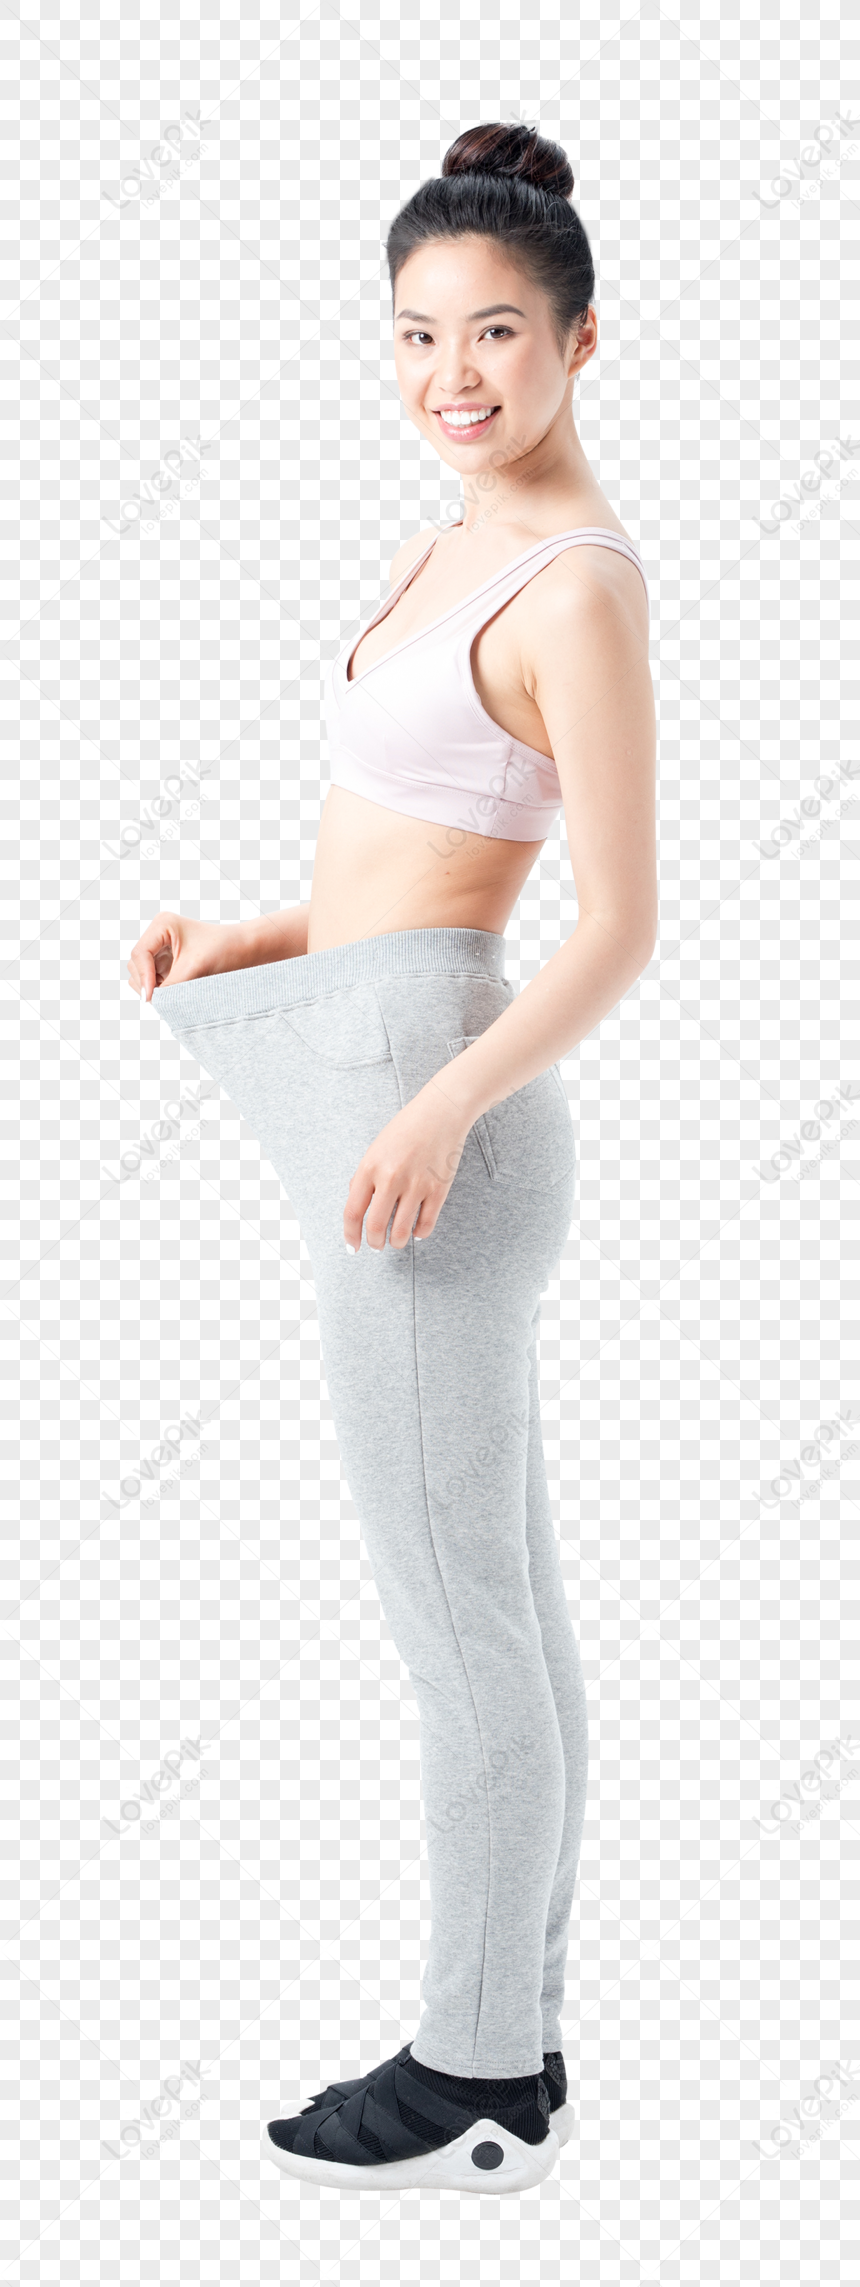 Slim Girl Have Points at Slim Waist in Big Trousers, Successful Weight Loss,  Isolated on Gray Background. Successful Stock Image - Image of female, diet:  305121735